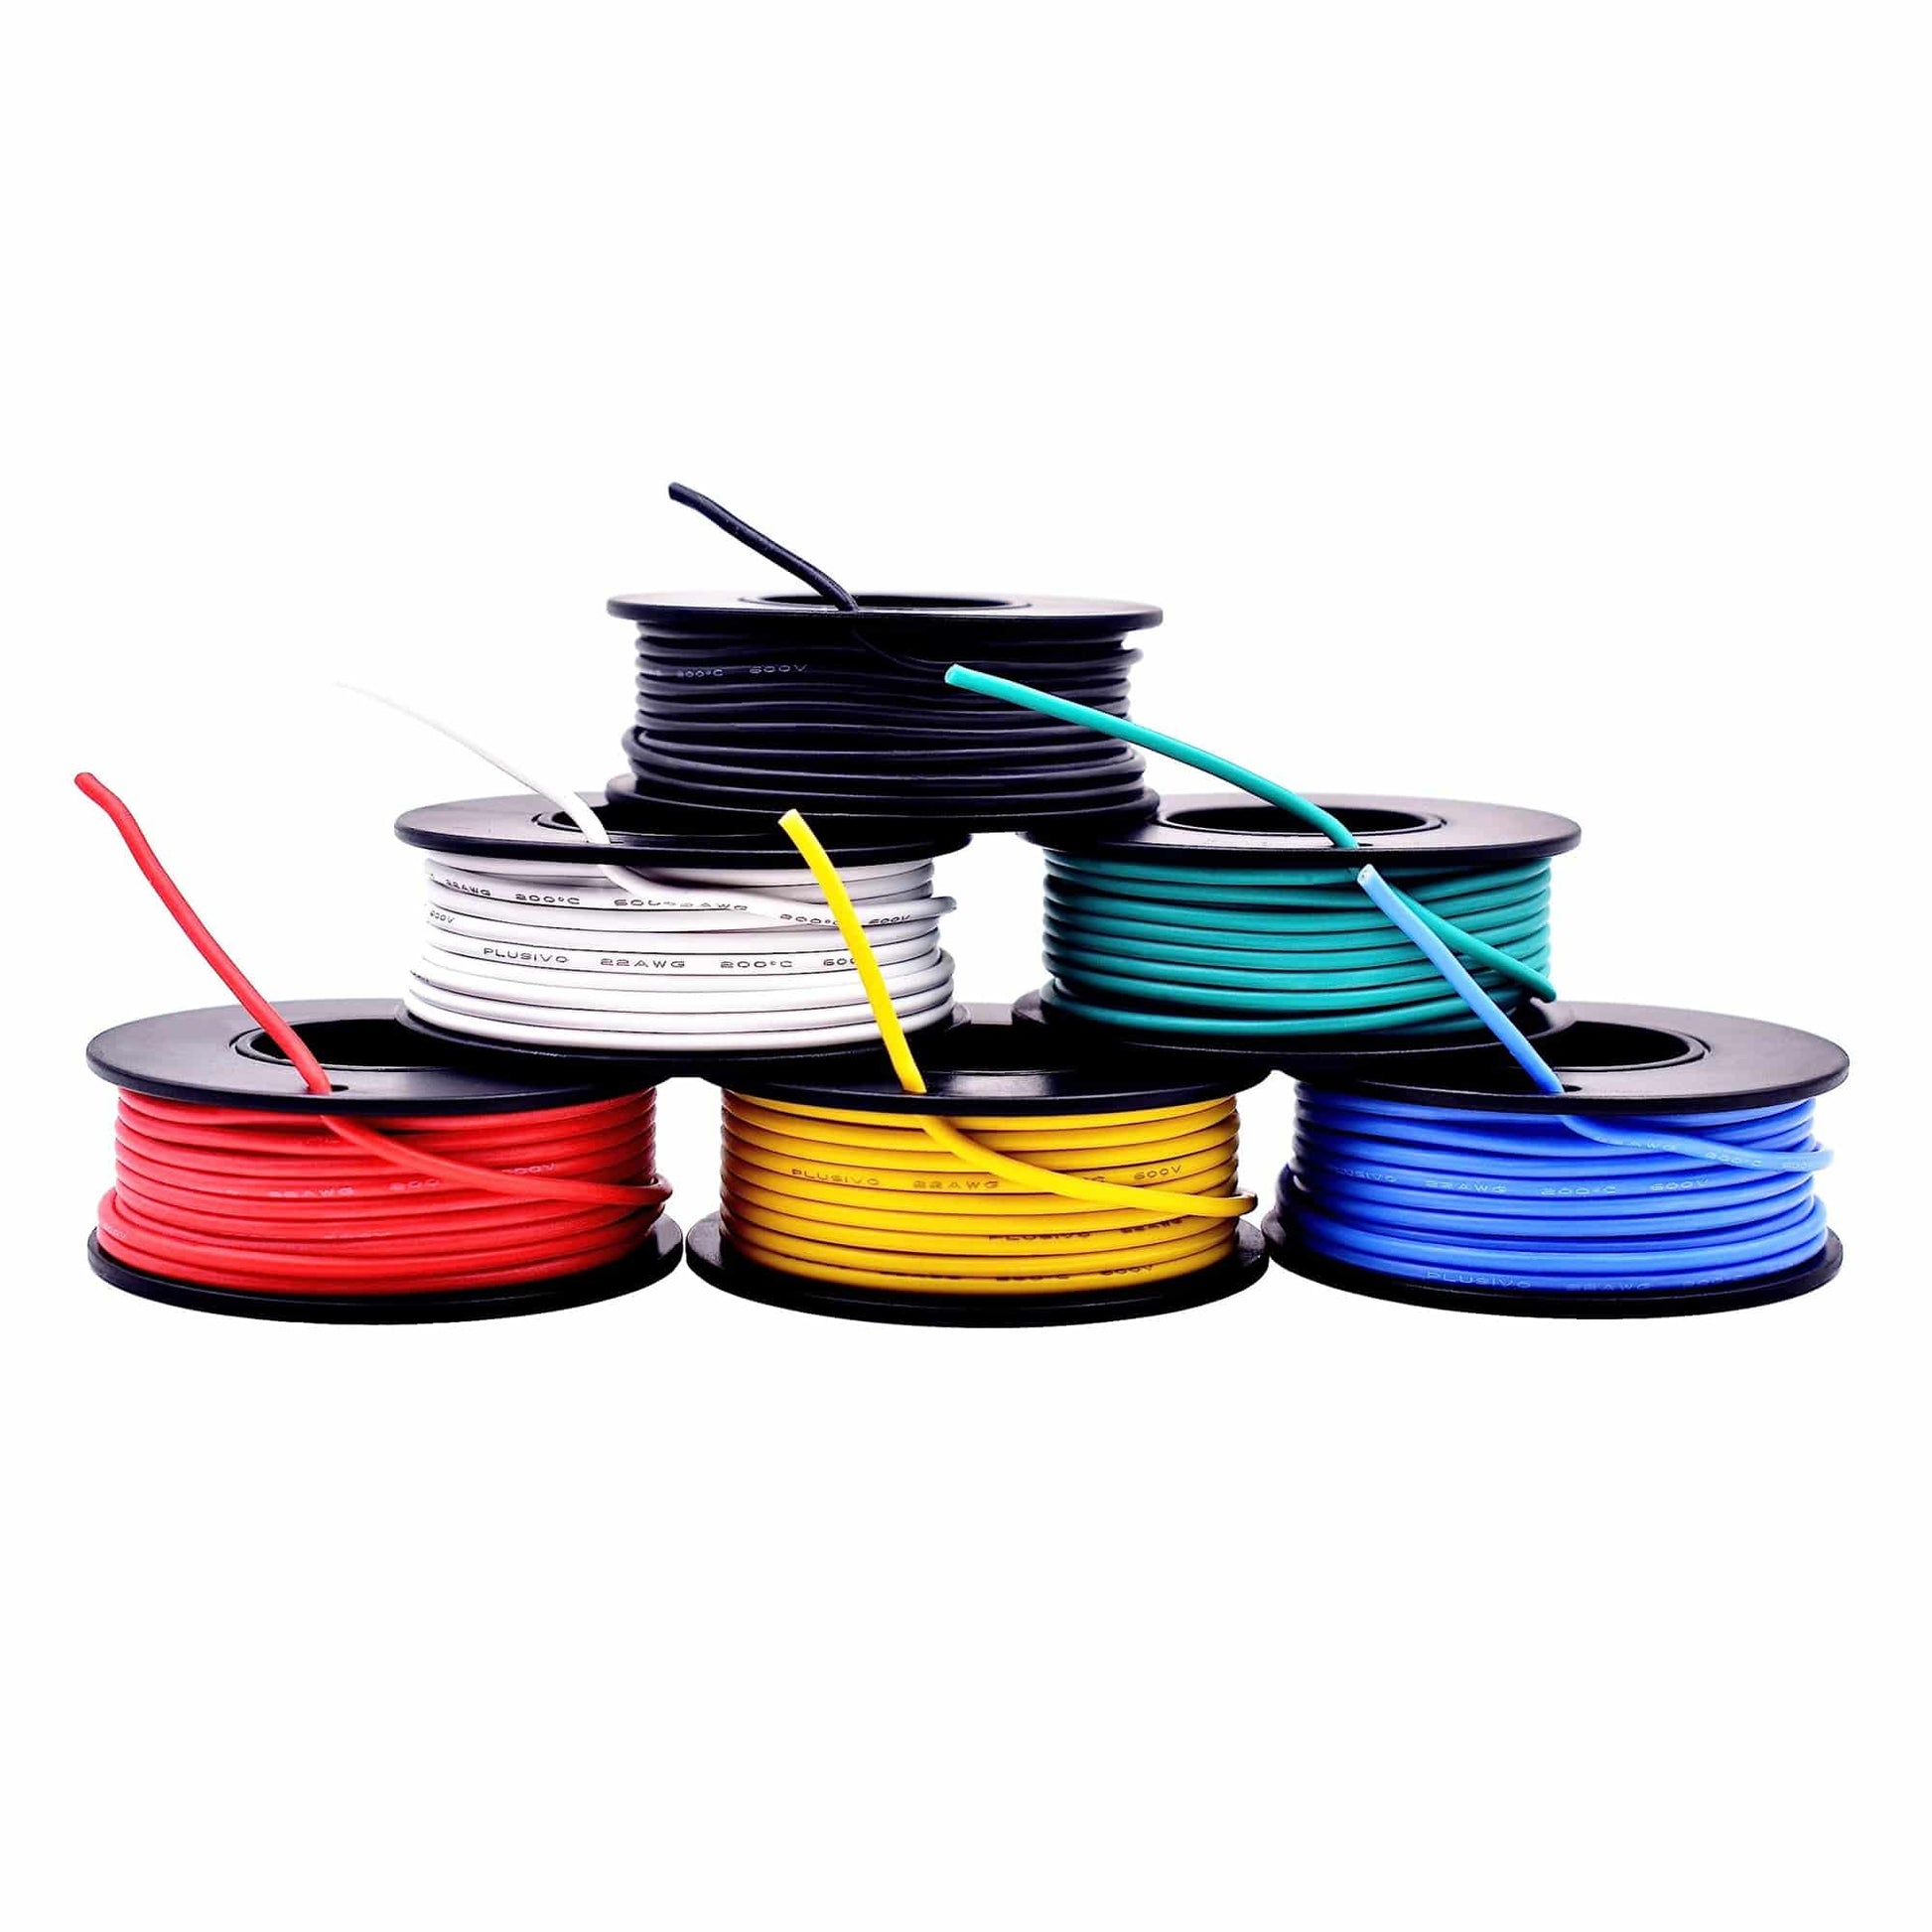 Plusivo Hook up Wire Kit Plusivo 22AWG 6 Colors x 10M